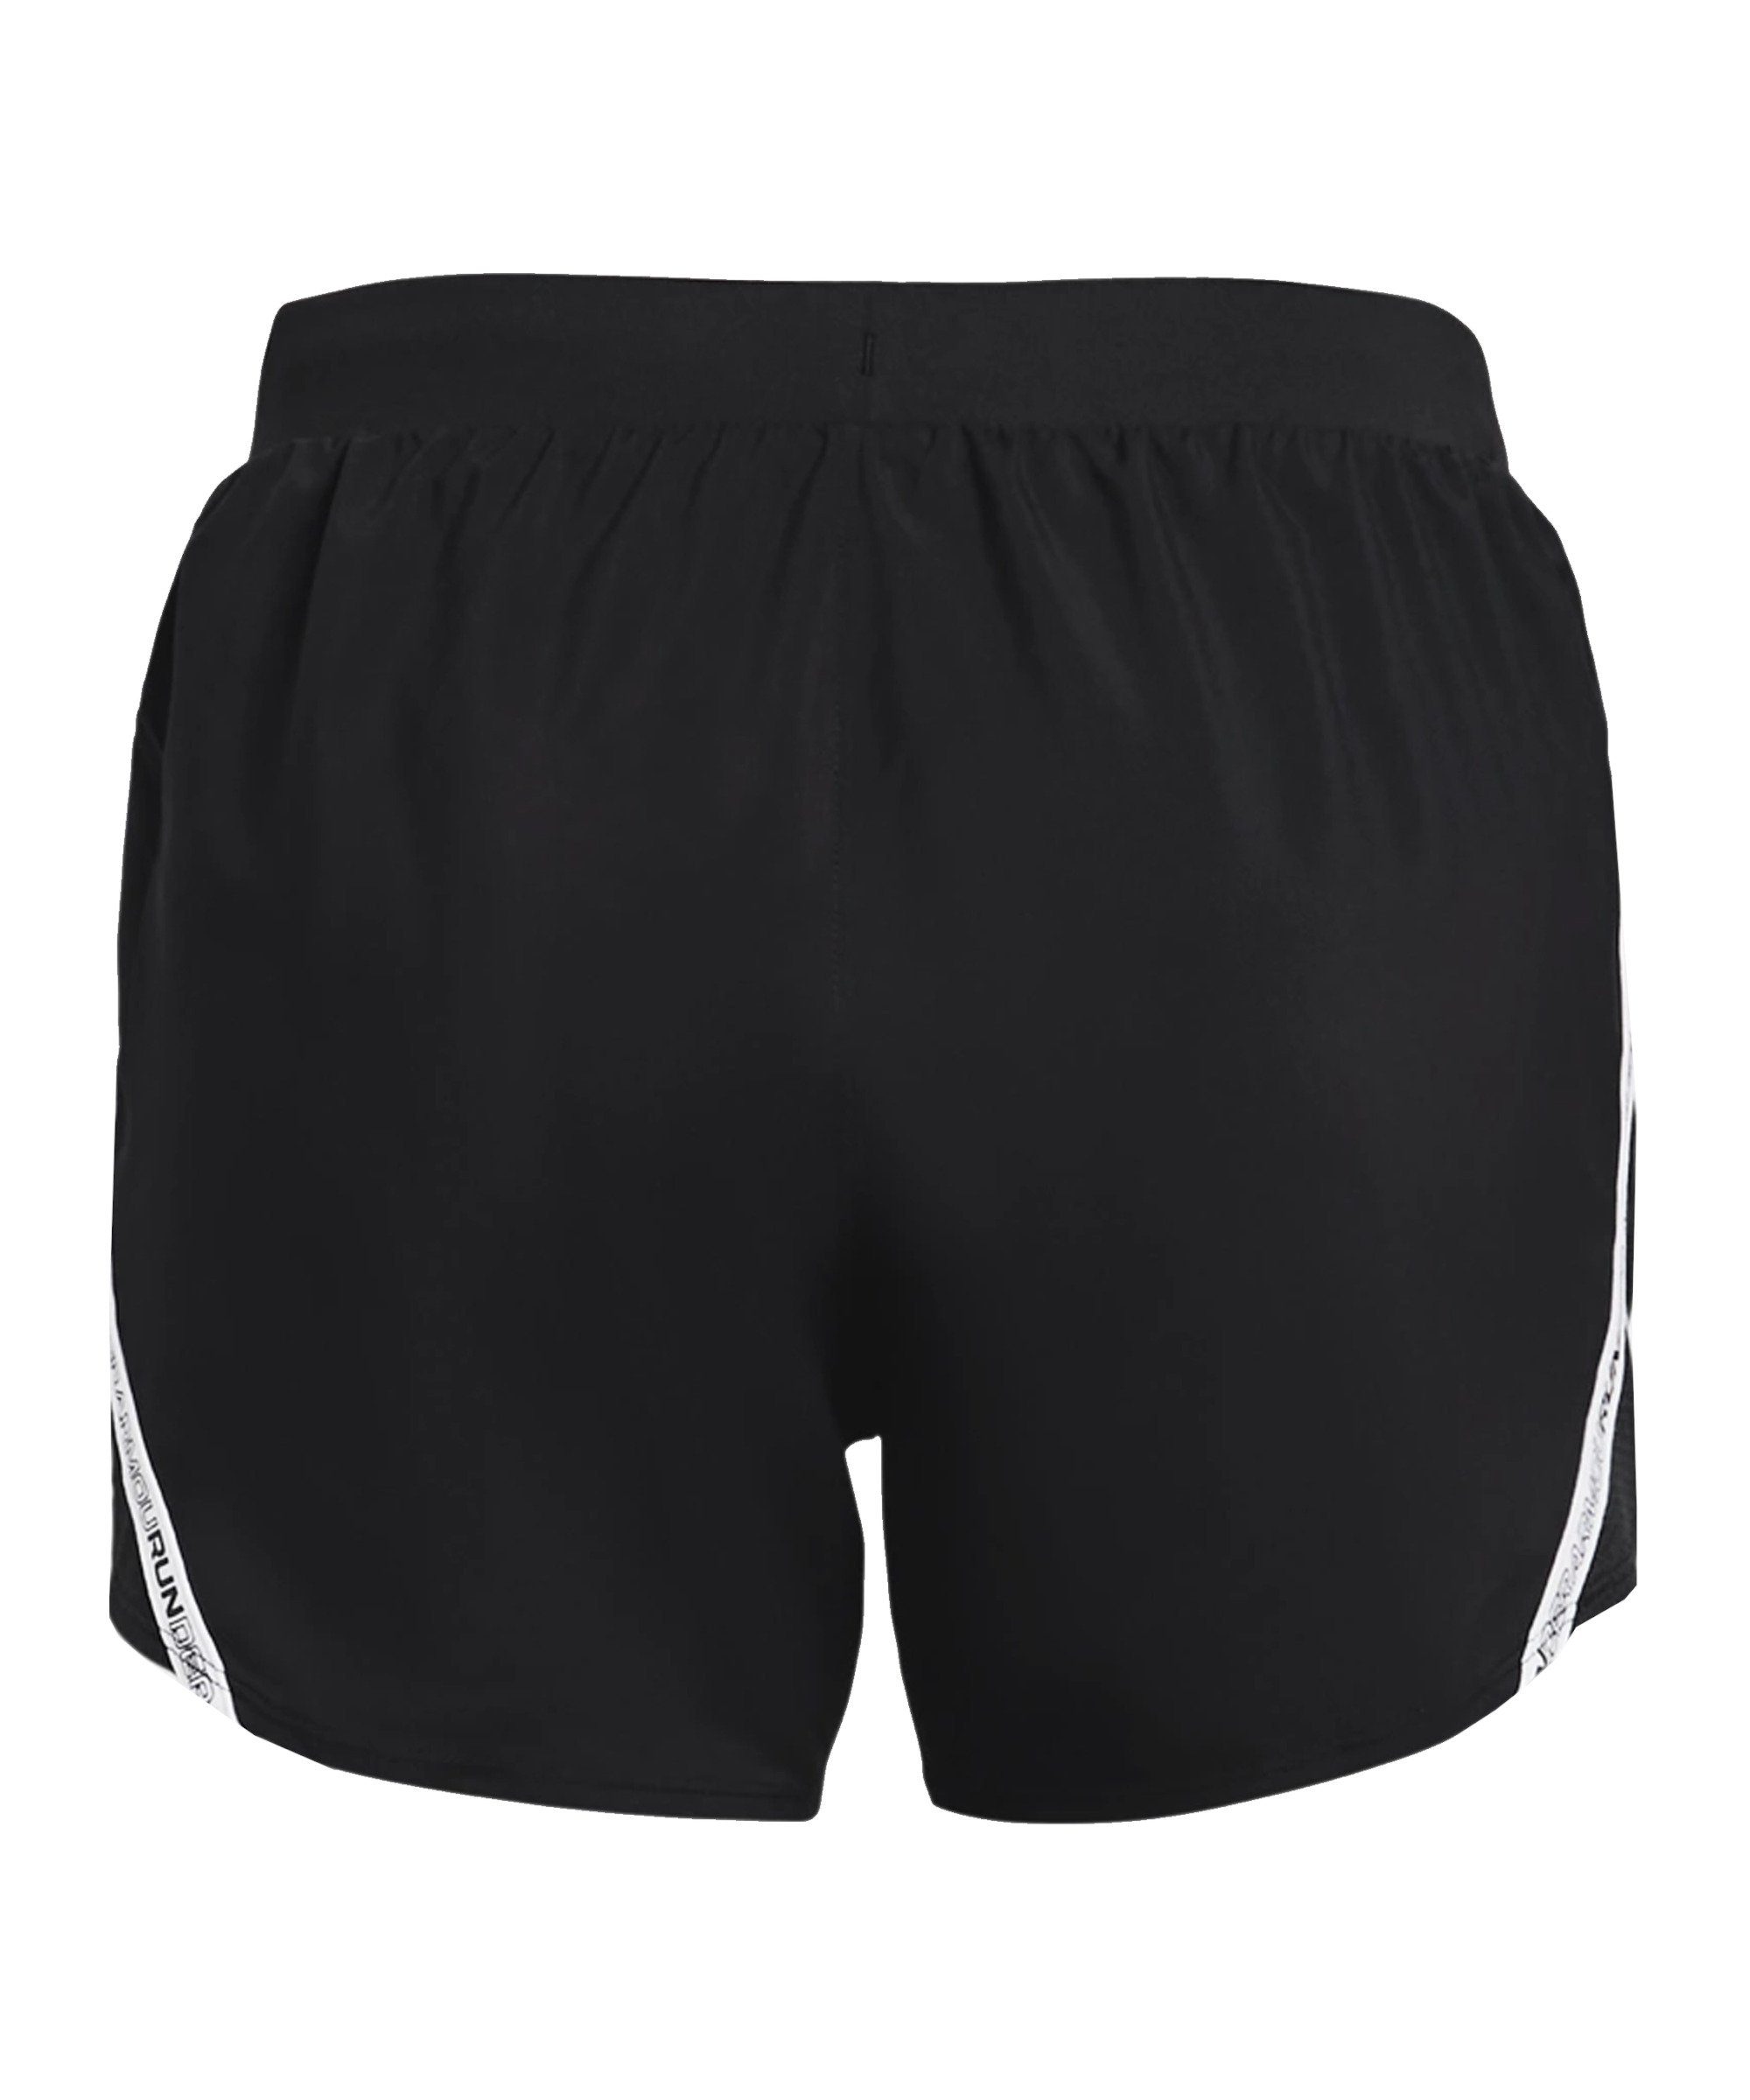 Under Armour® Sporthose By 2.0 Damen Brand Fly Short